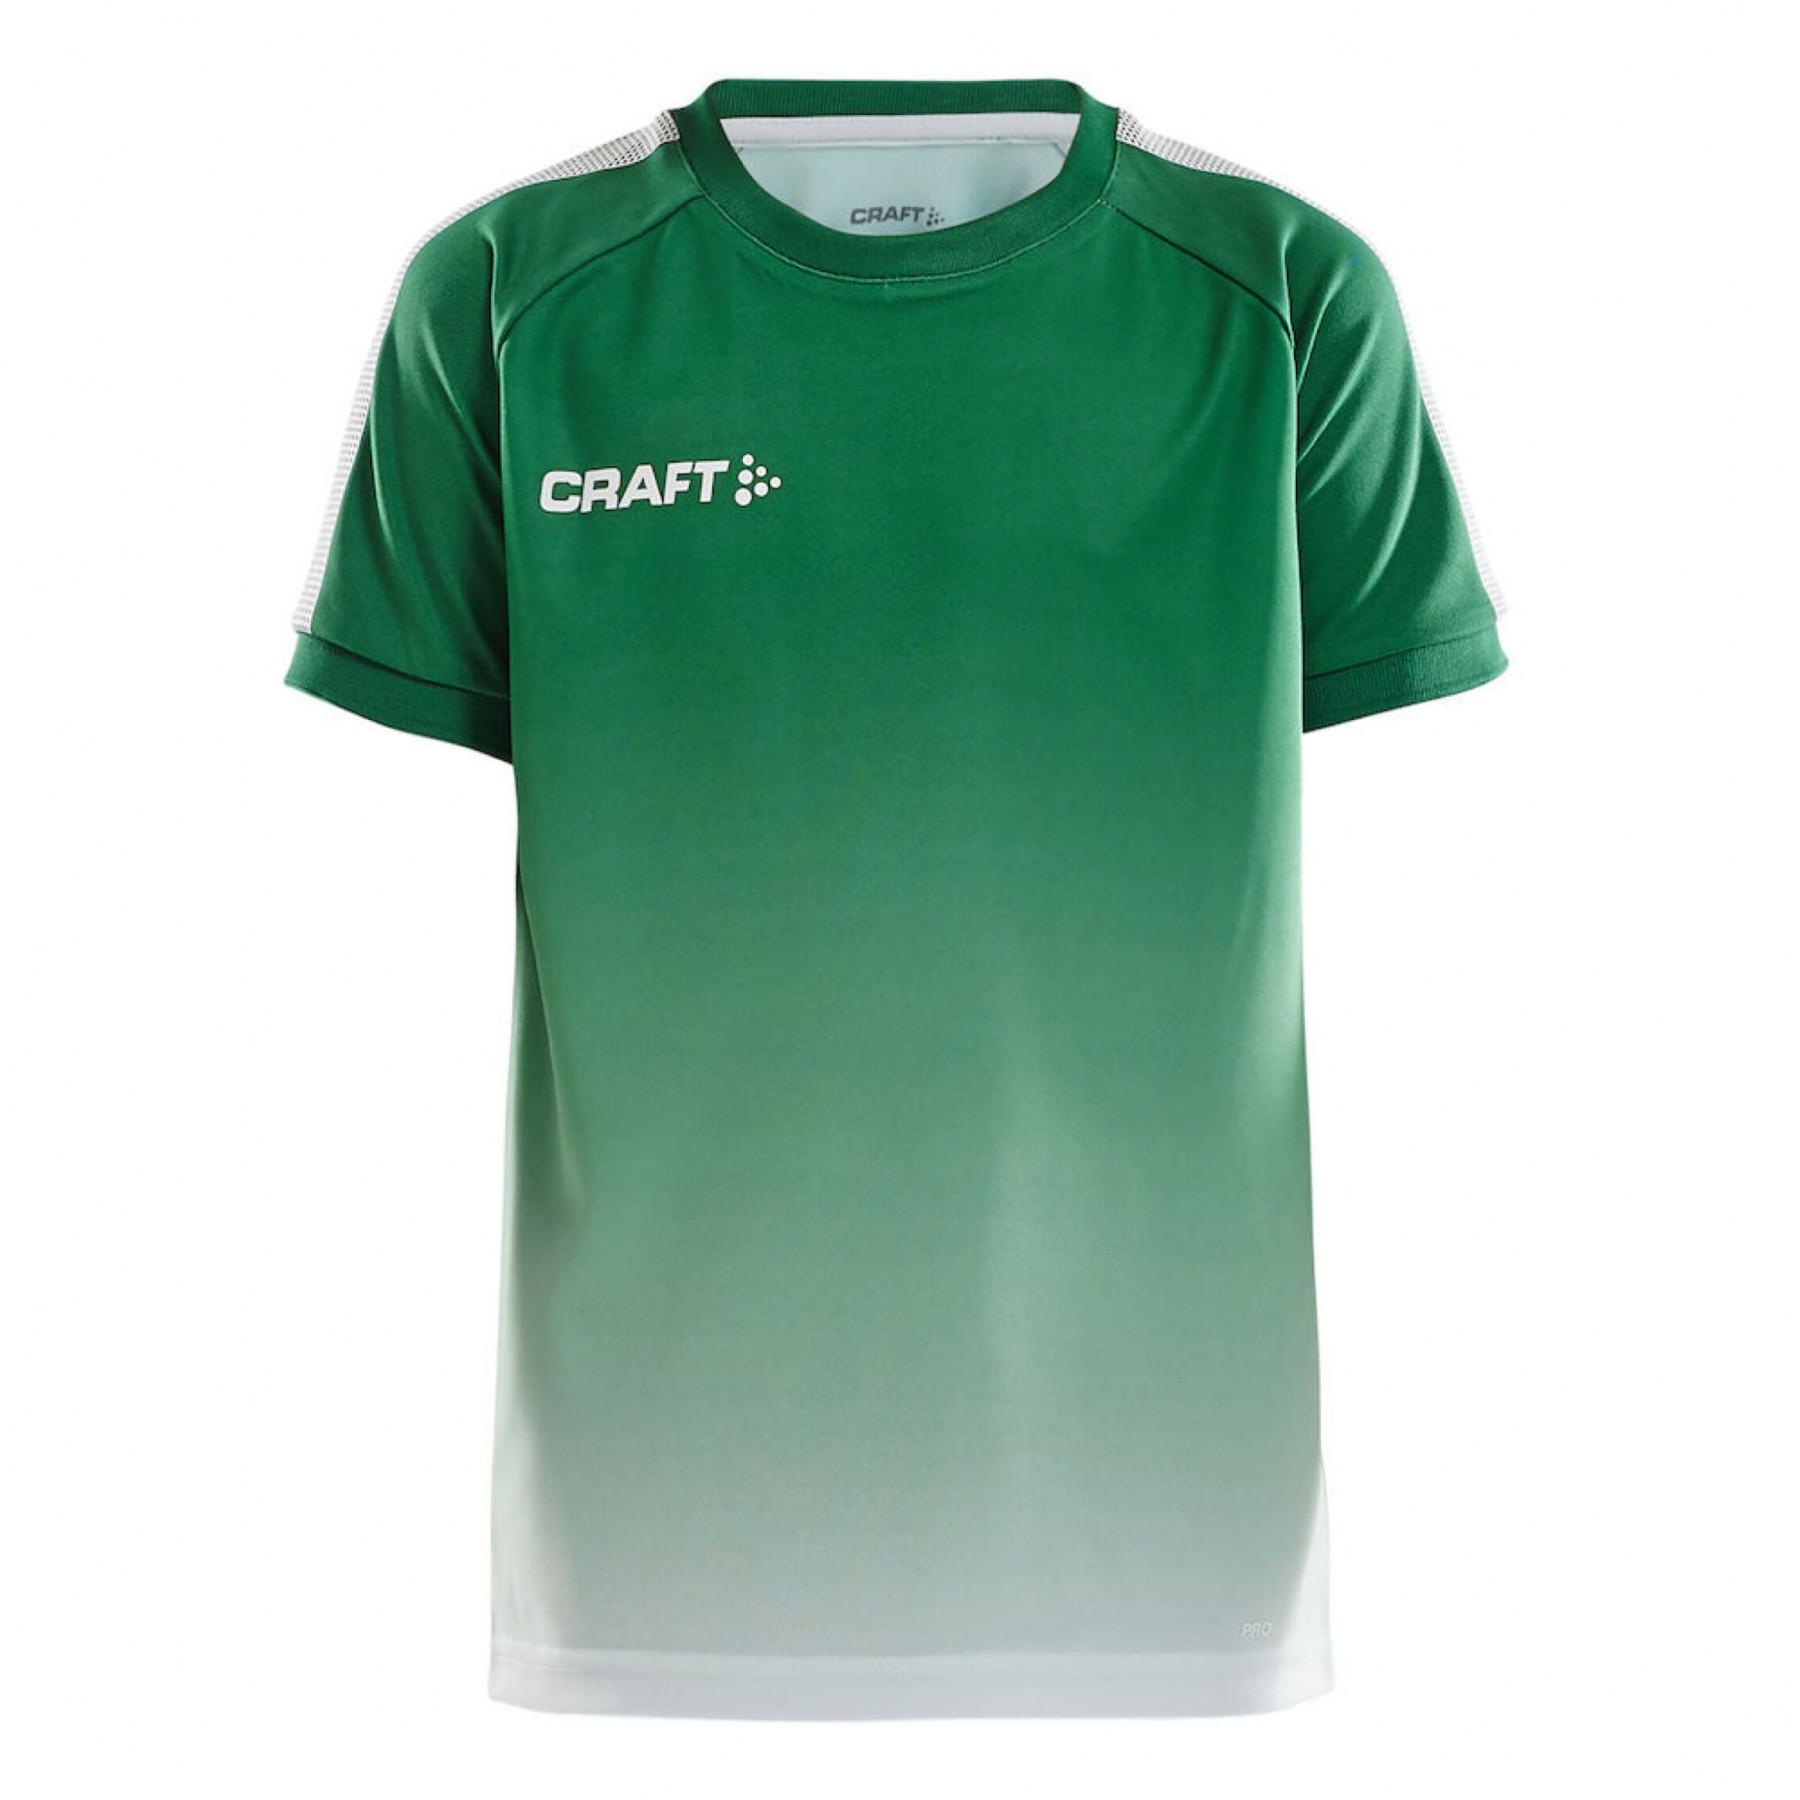 Kid's jersey Craft pro control fade